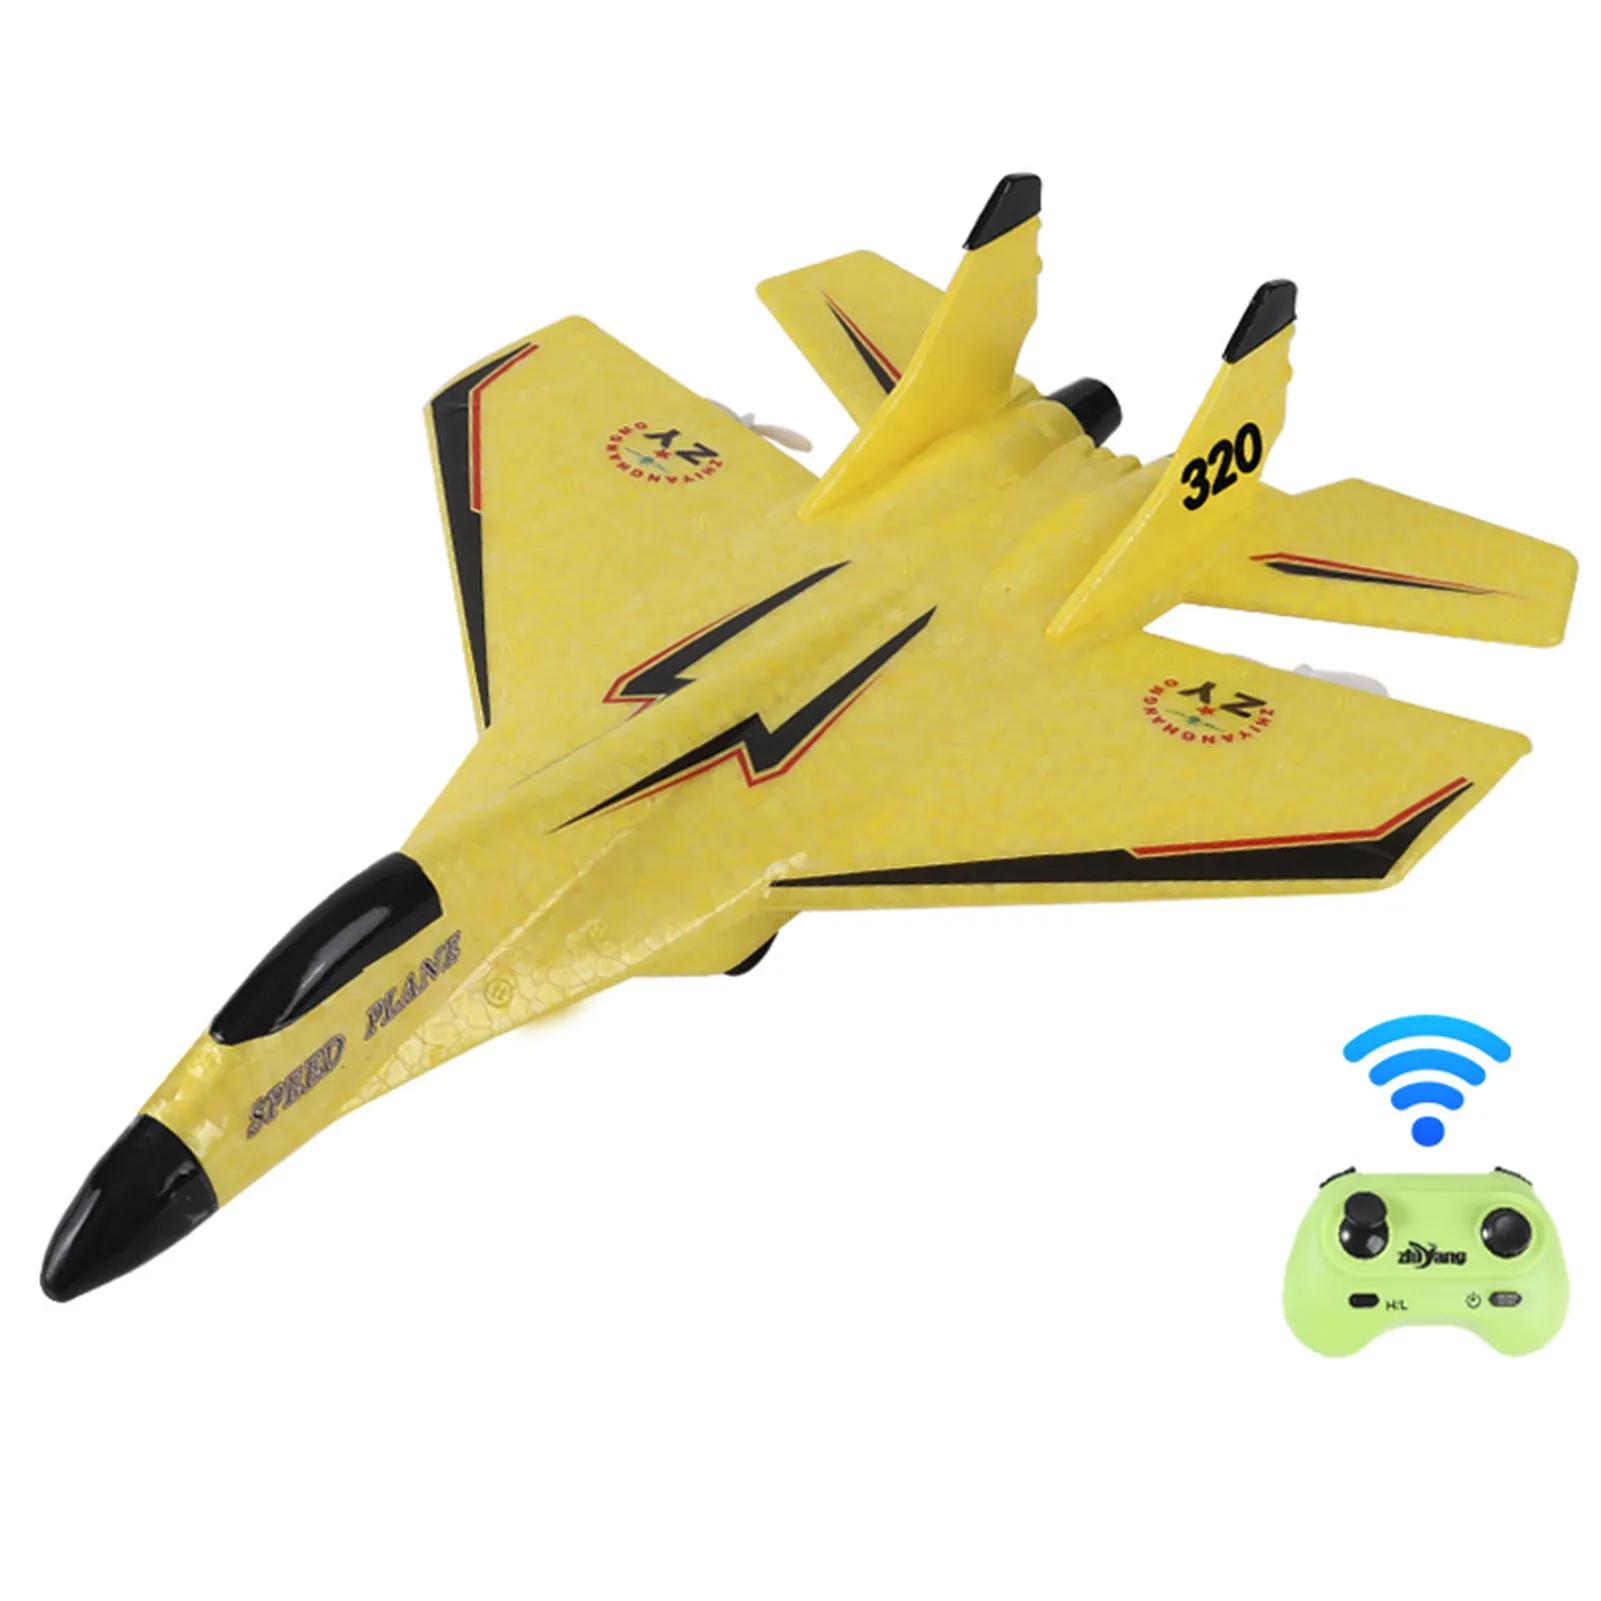 Rc Airplane With Light Model Aircrafts Epp Foam Fighter Rechargeable: Customize Your RC Airplane with the EPP Foam Fighter Model